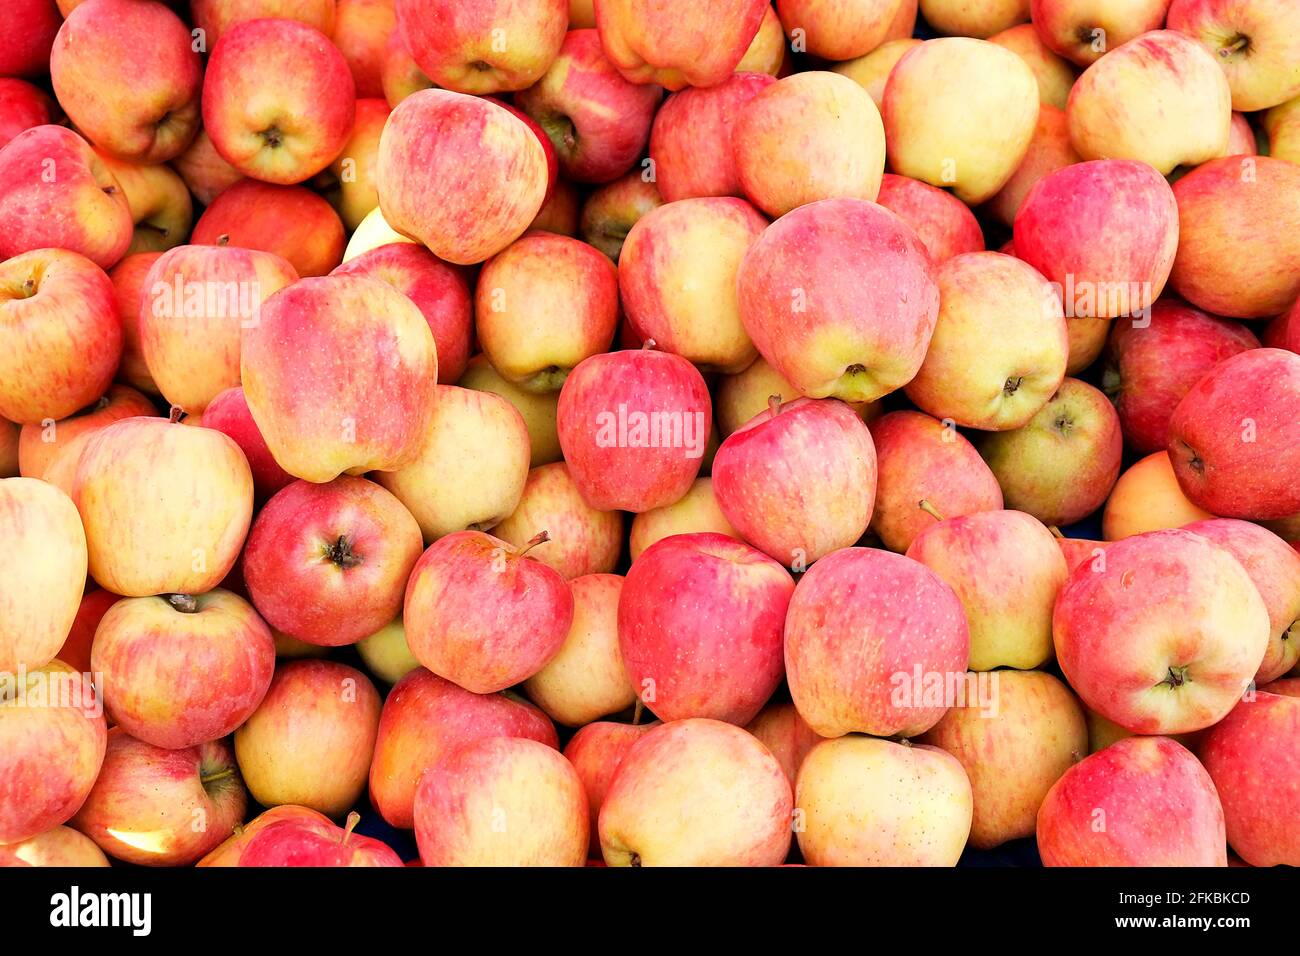 https://c8.alamy.com/comp/2FKBKCD/a-bunch-of-ripe-freshly-picked-organic-crunchy-red-apples-at-local-produce-farmers-market-counter-clean-eating-concept-sweet-fruits-for-fit-and-heal-2FKBKCD.jpg